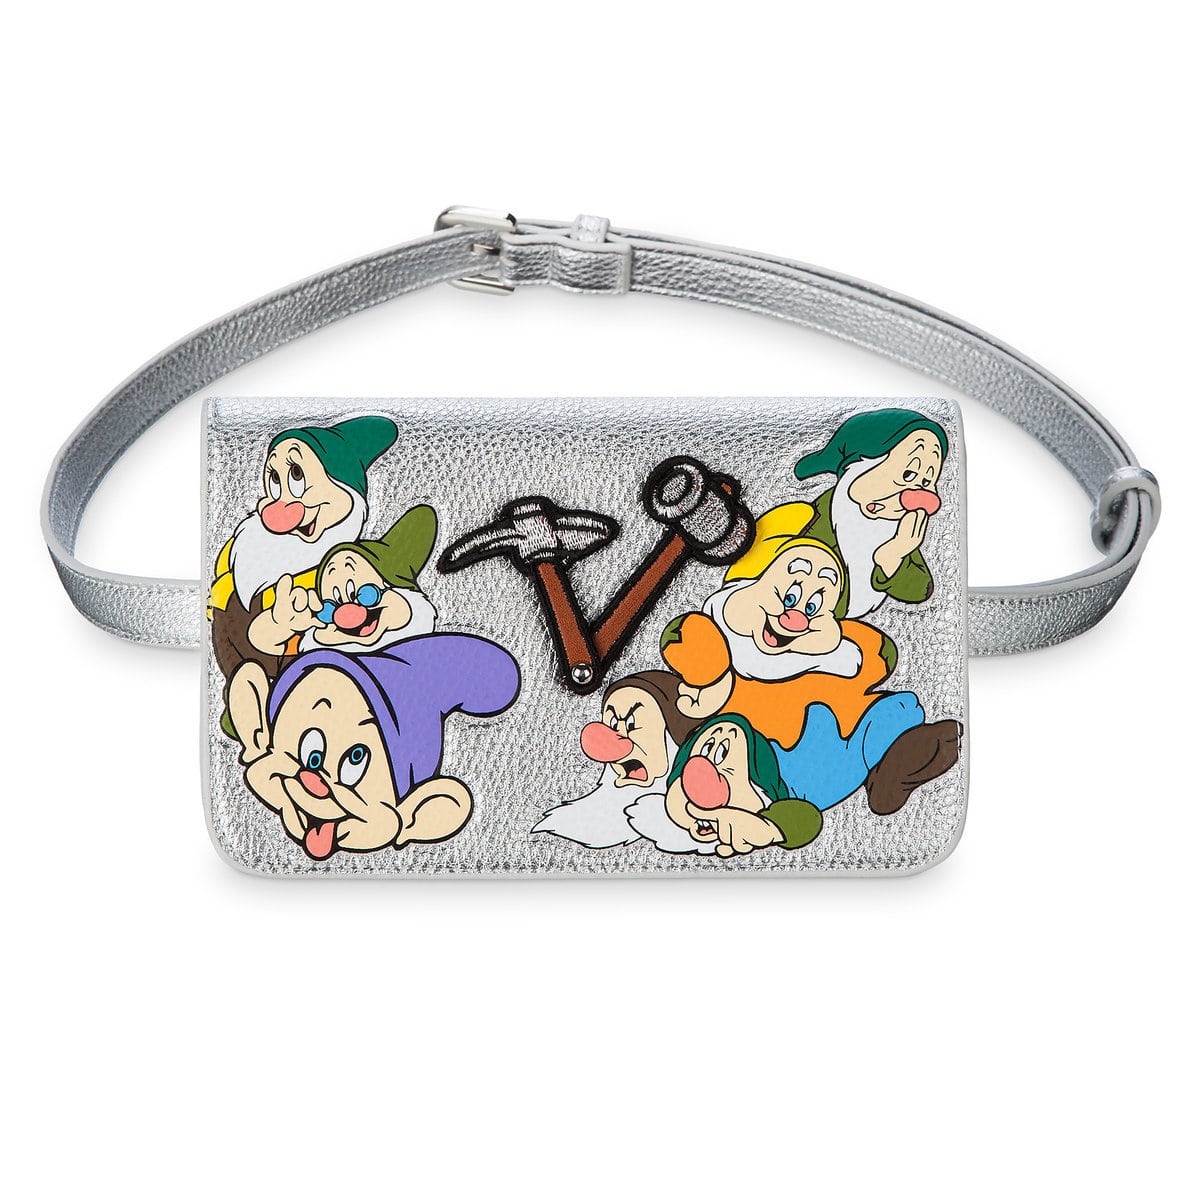 Classic Disney Fanny Packs From The '90s Are Back Simplemost